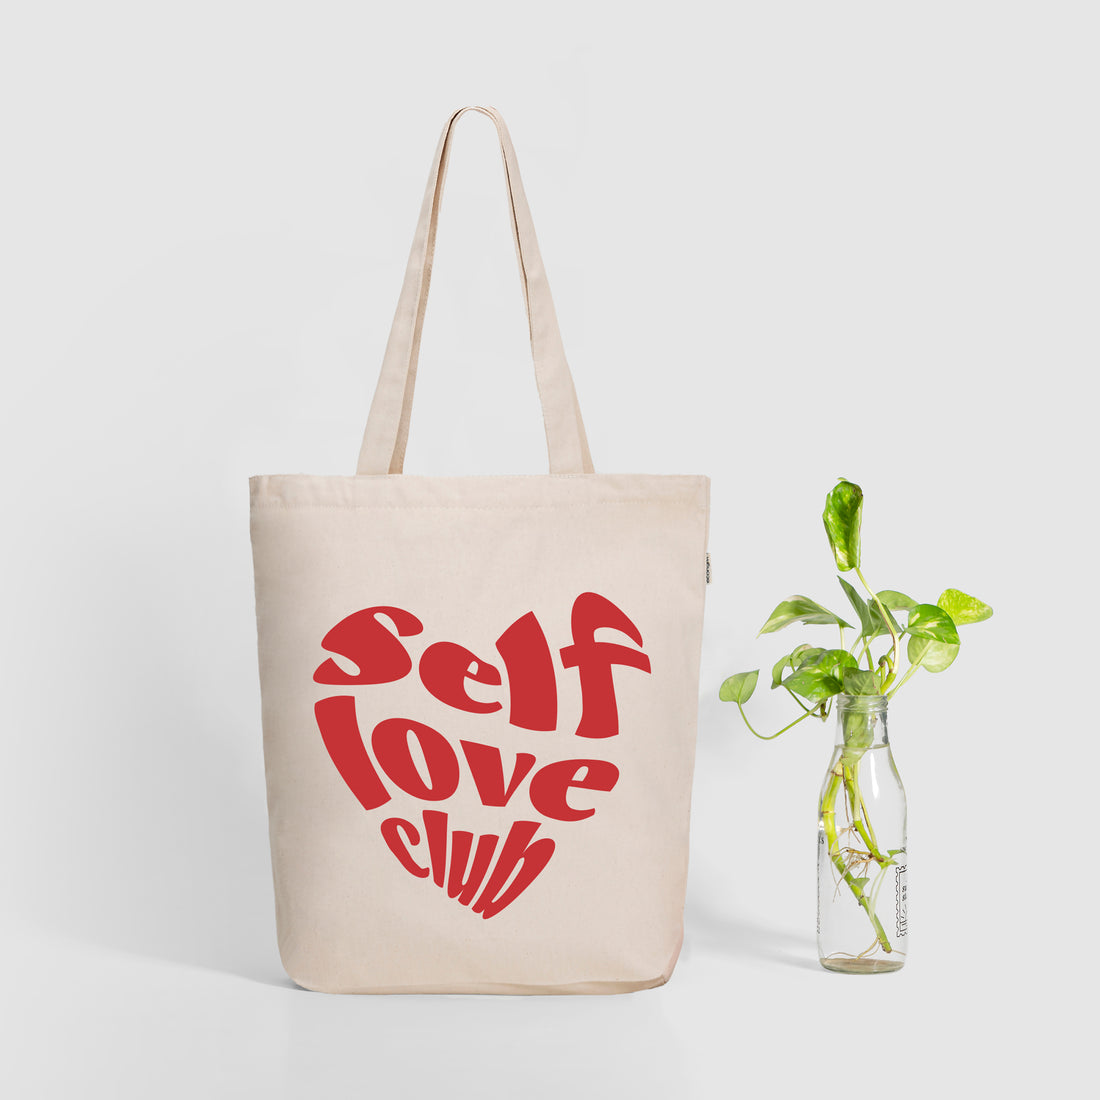 Tote bag for college, Tote and bag, Cloth bags, Tote bag cotton, Tote bag purse, Women tote bags for college, Ecoright